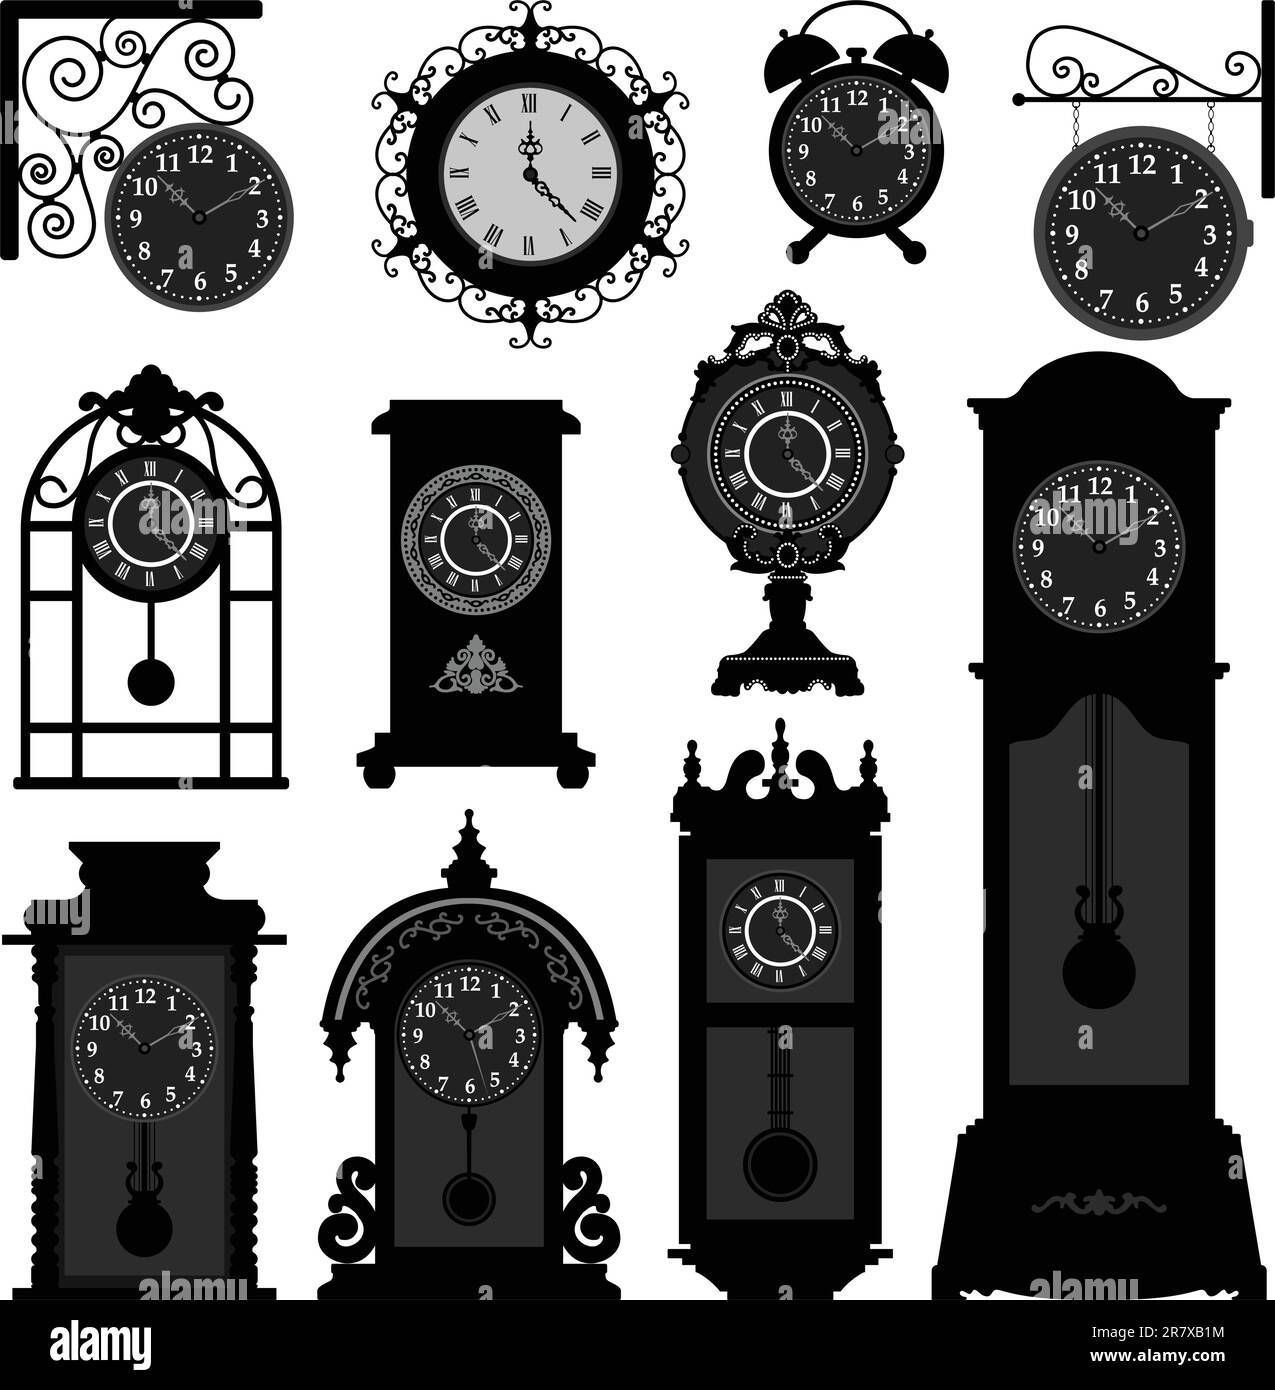 A set of antique old clocks design in detail. Stock Vector